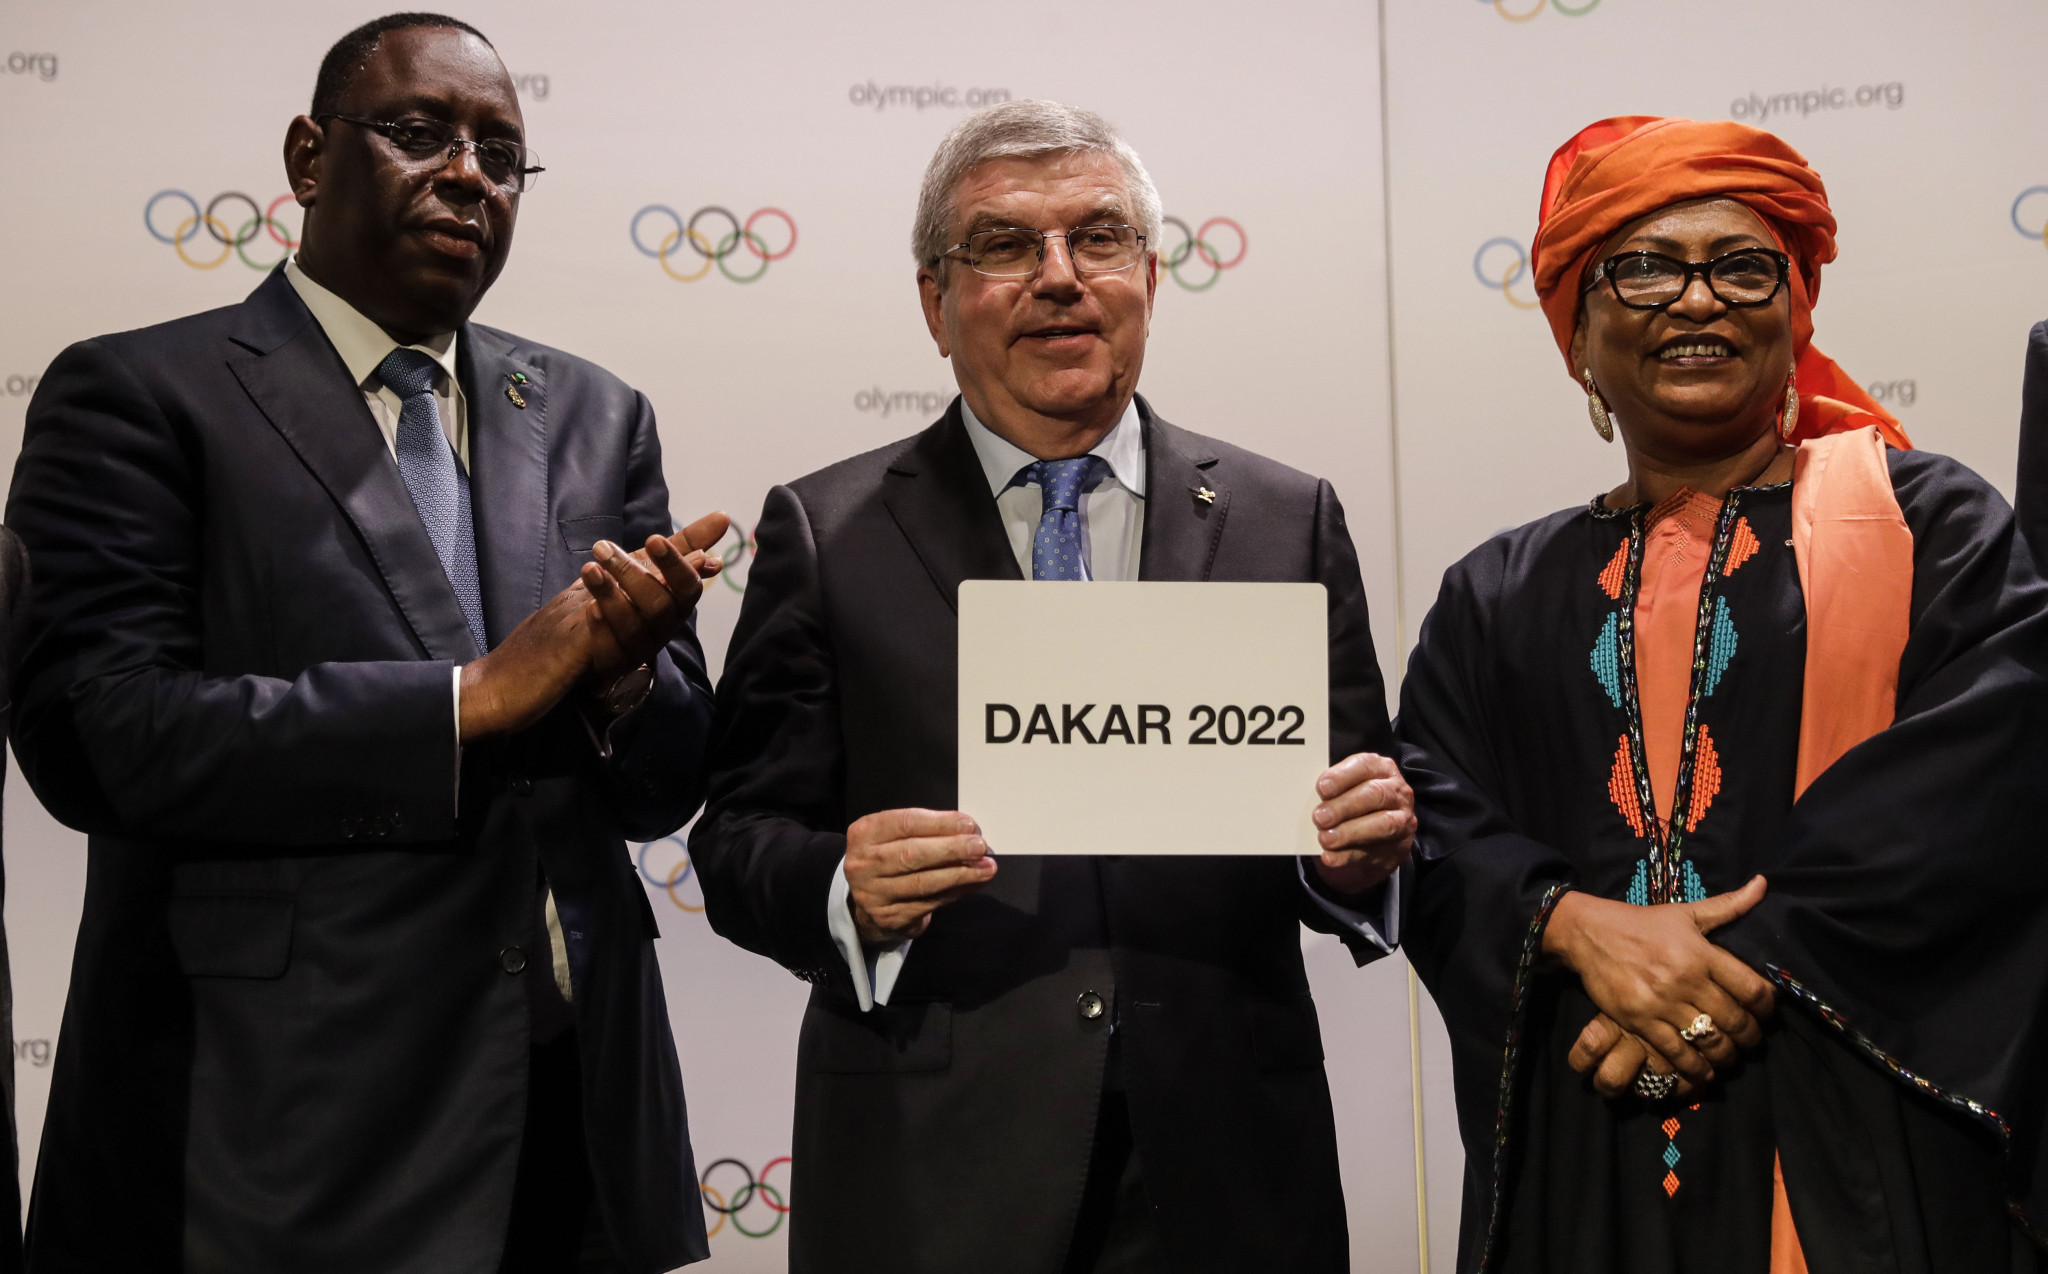 Dakar was announced as the host the 2022 Summer Youth Olympic Games yesterday ©Getty Images